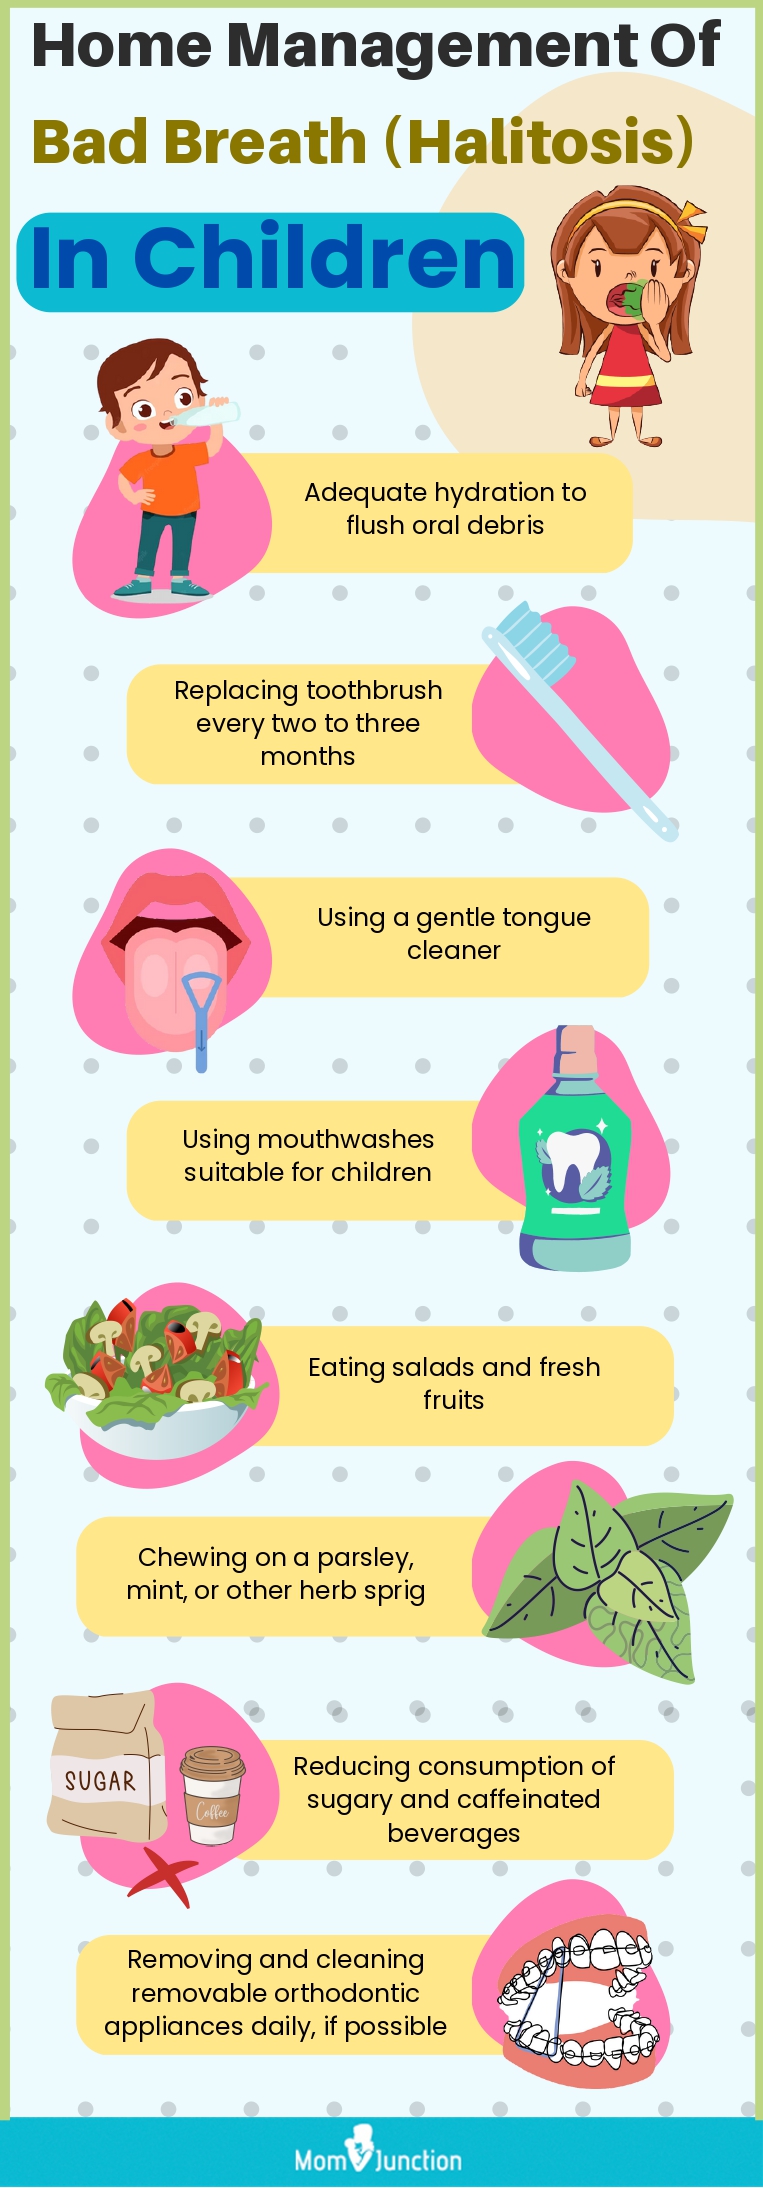 home management of bad breath (halitosis) in children (infographic)